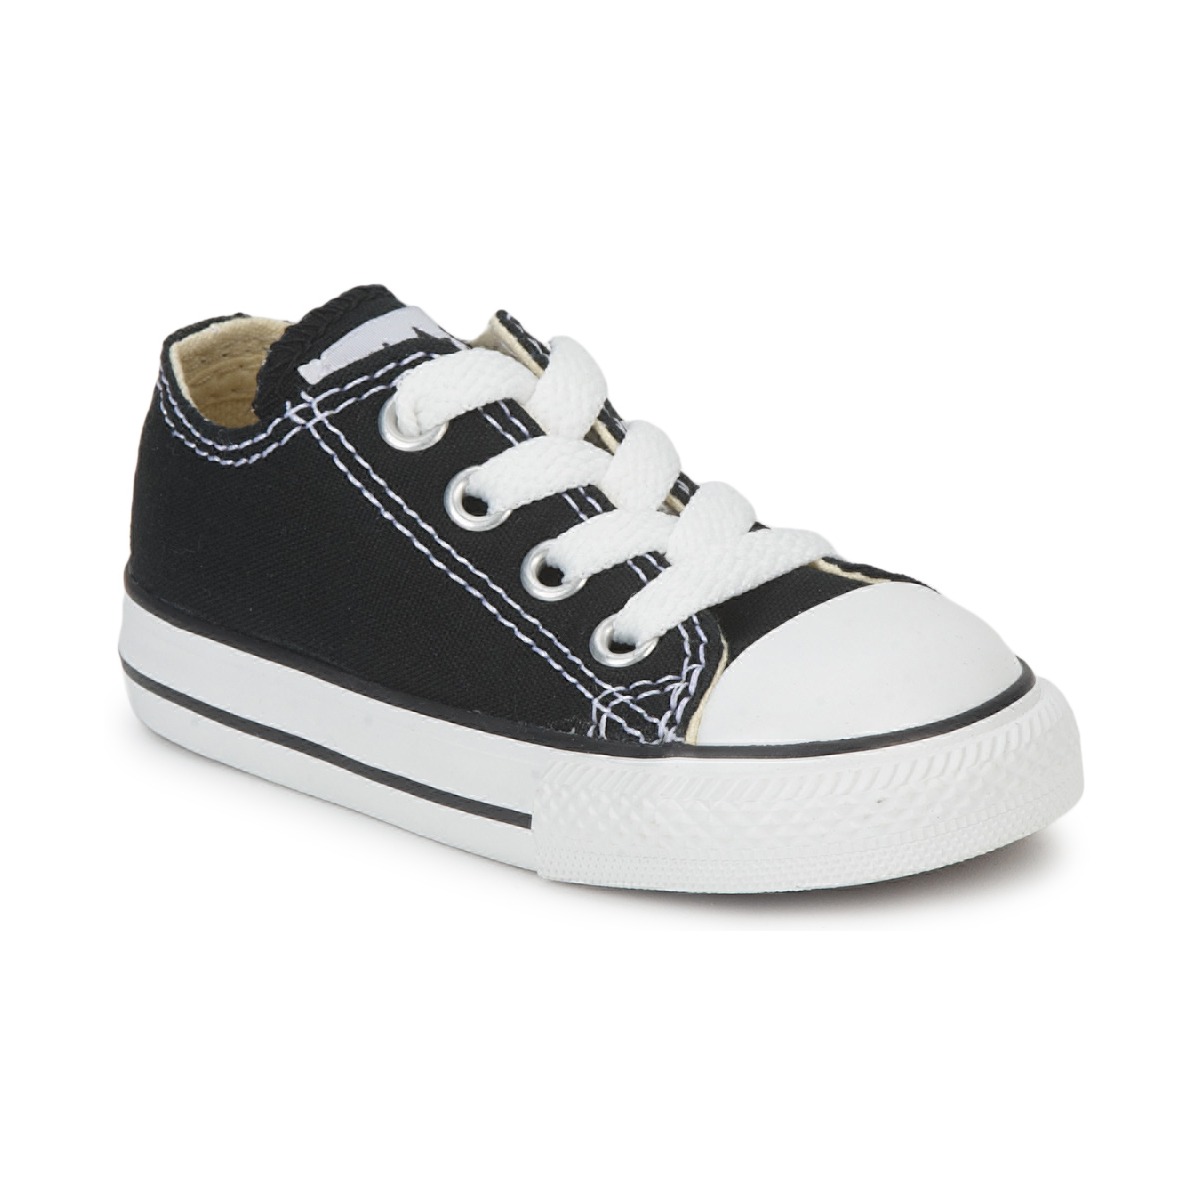 Xαμηλά Sneakers Converse ALL STAR OX